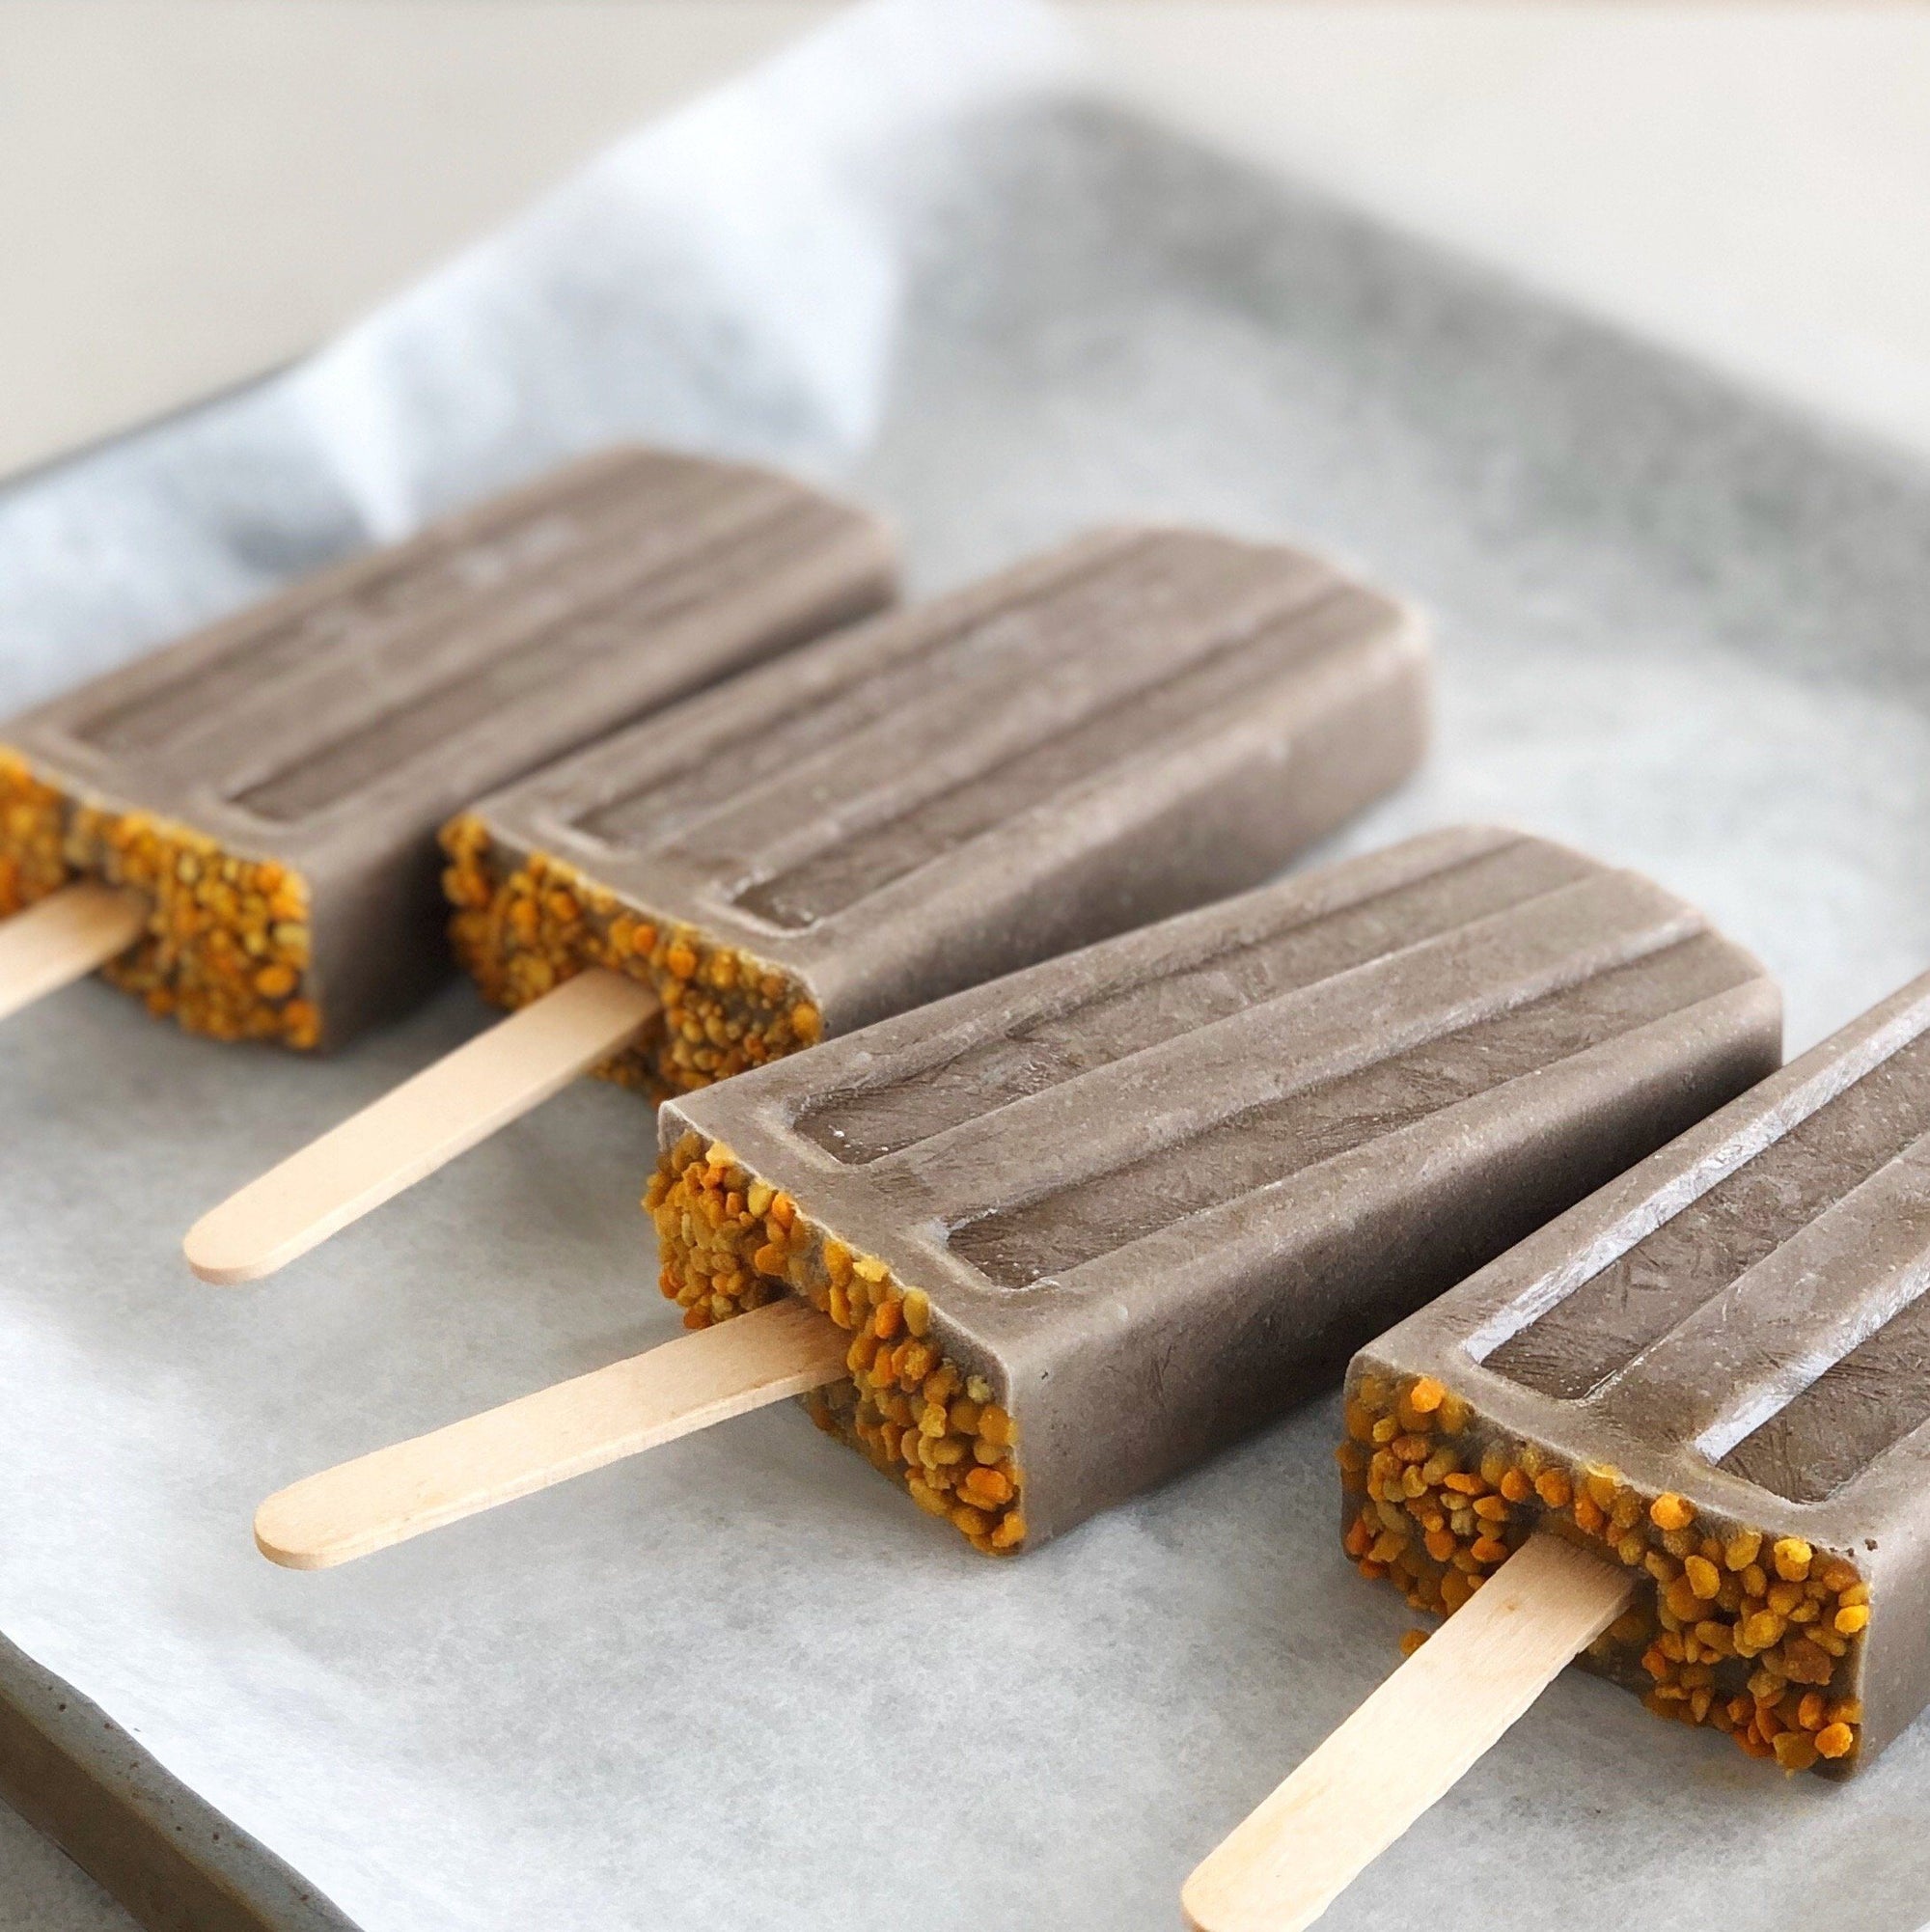 Bliss-ful Blueberry Cacao Lavender Popsicles